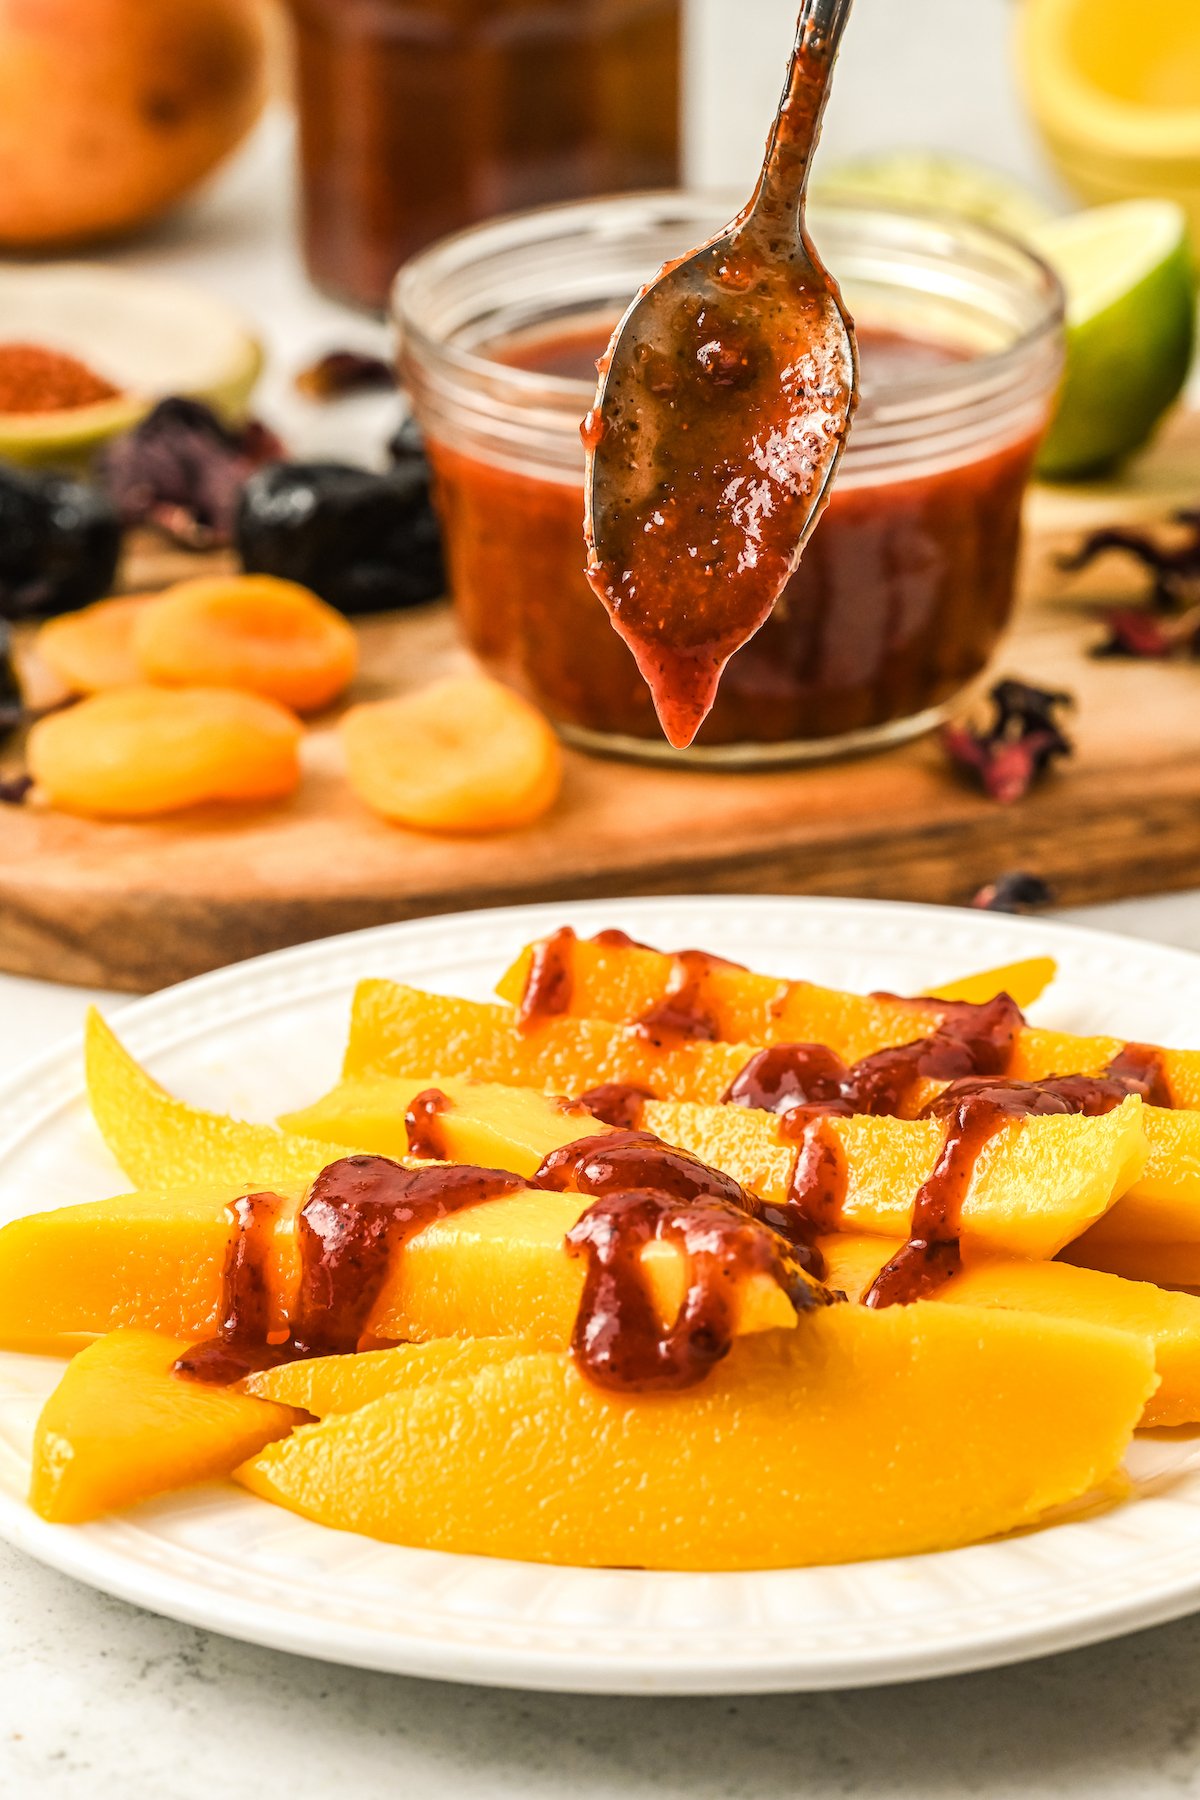 Drizzling homemade chamoy over mango slices.